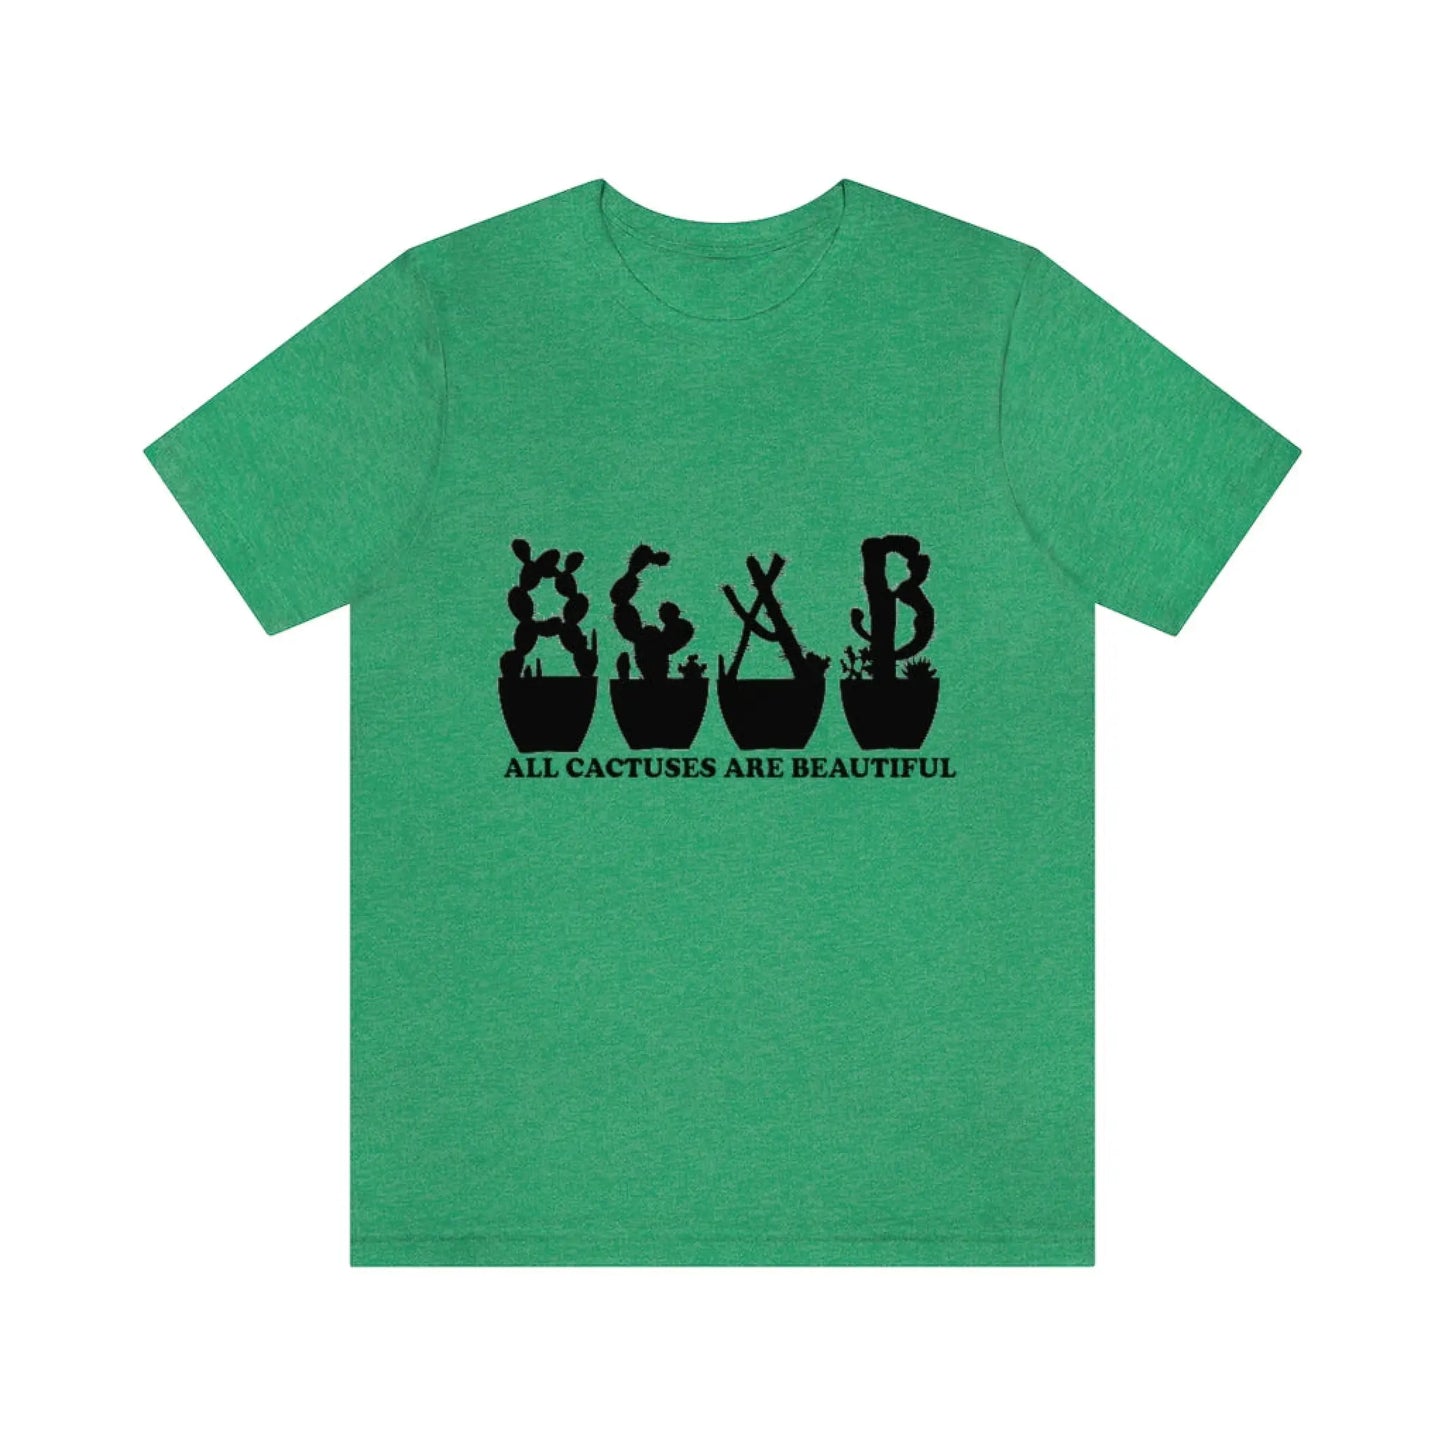 Shirts XL - All Cactuses Are Beautiful - Heather Kelly /